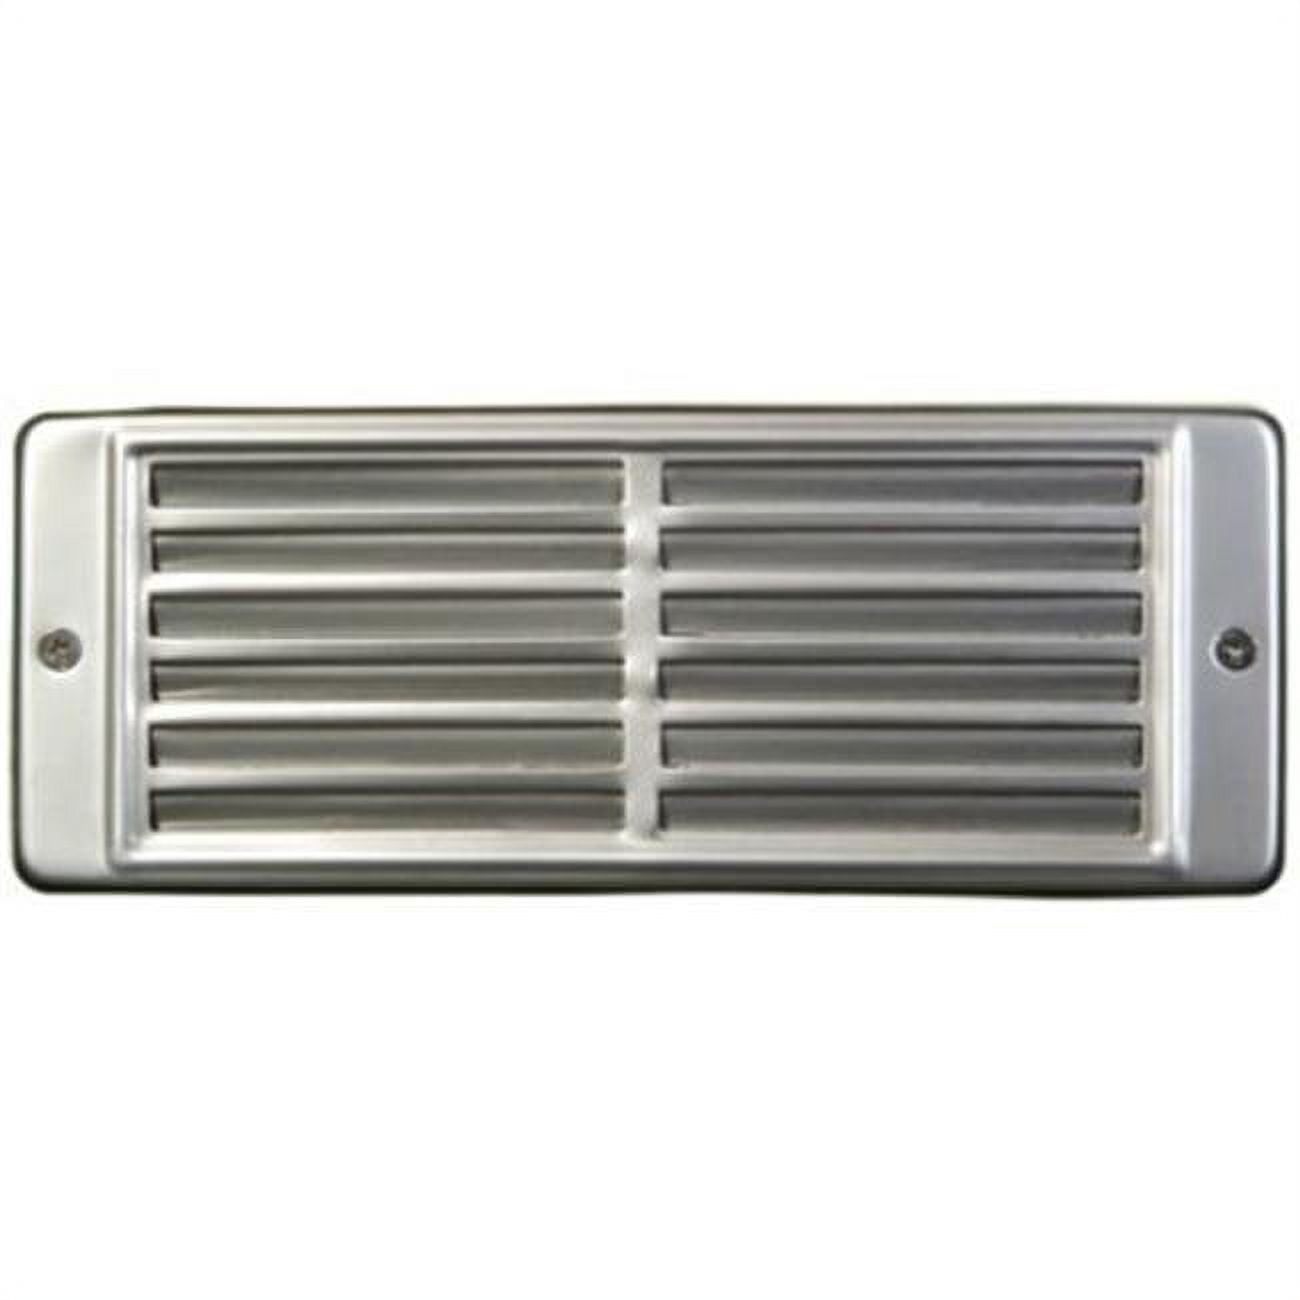 Picture of Dabmar Lighting LV600-SS304 2x 20W 12V Recessed Stainless Steel Louvered Brick Step Wall Light - JC Type Lamp, 304 Stainless Steel